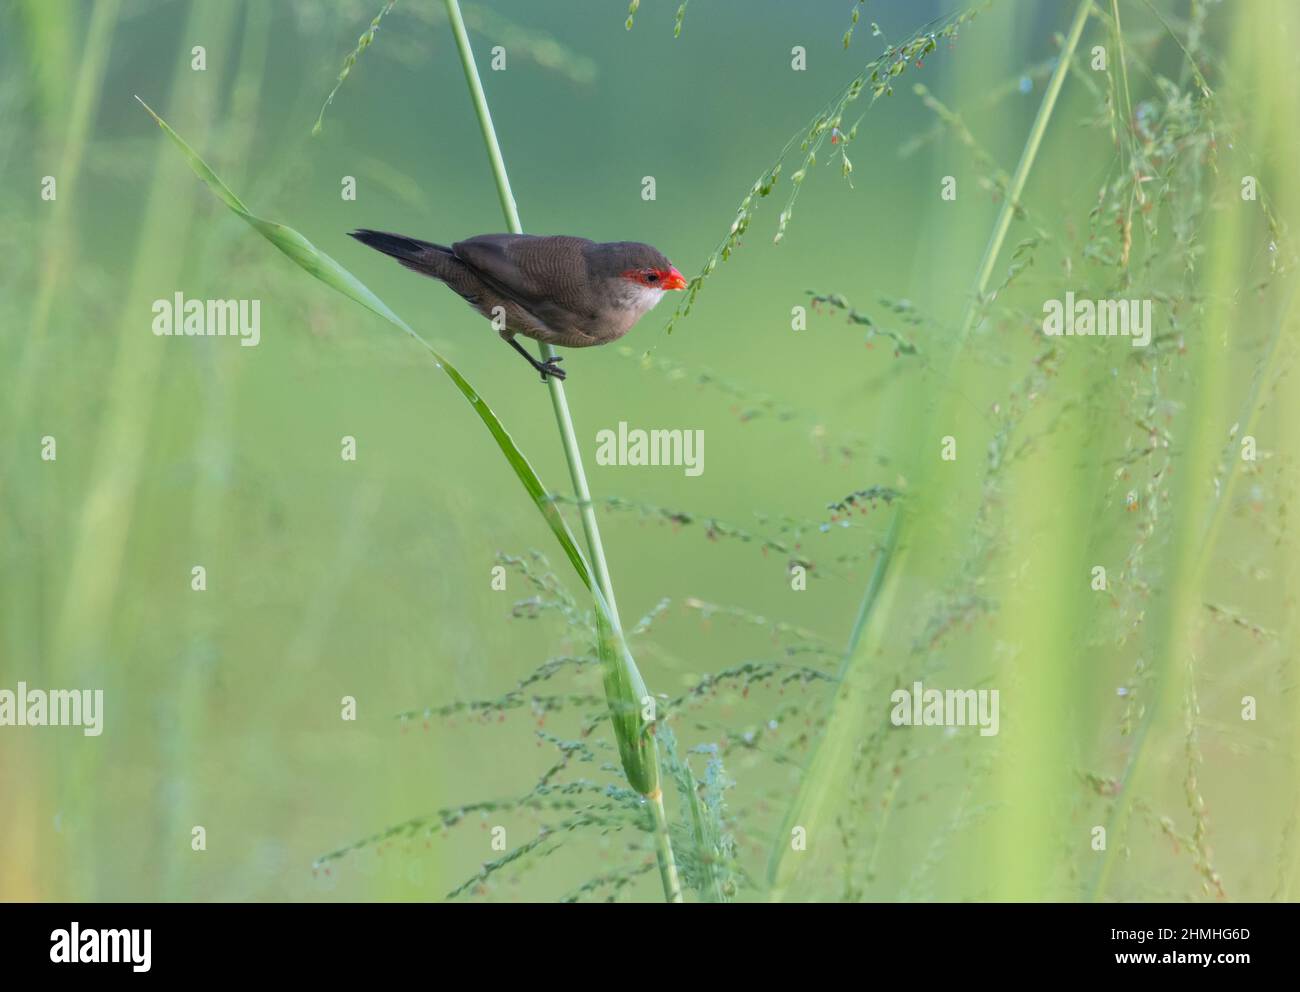 Small Common Waxbill bird, Estrilda astrild, eating seeds from tall reeds and grass in a field. Stock Photo